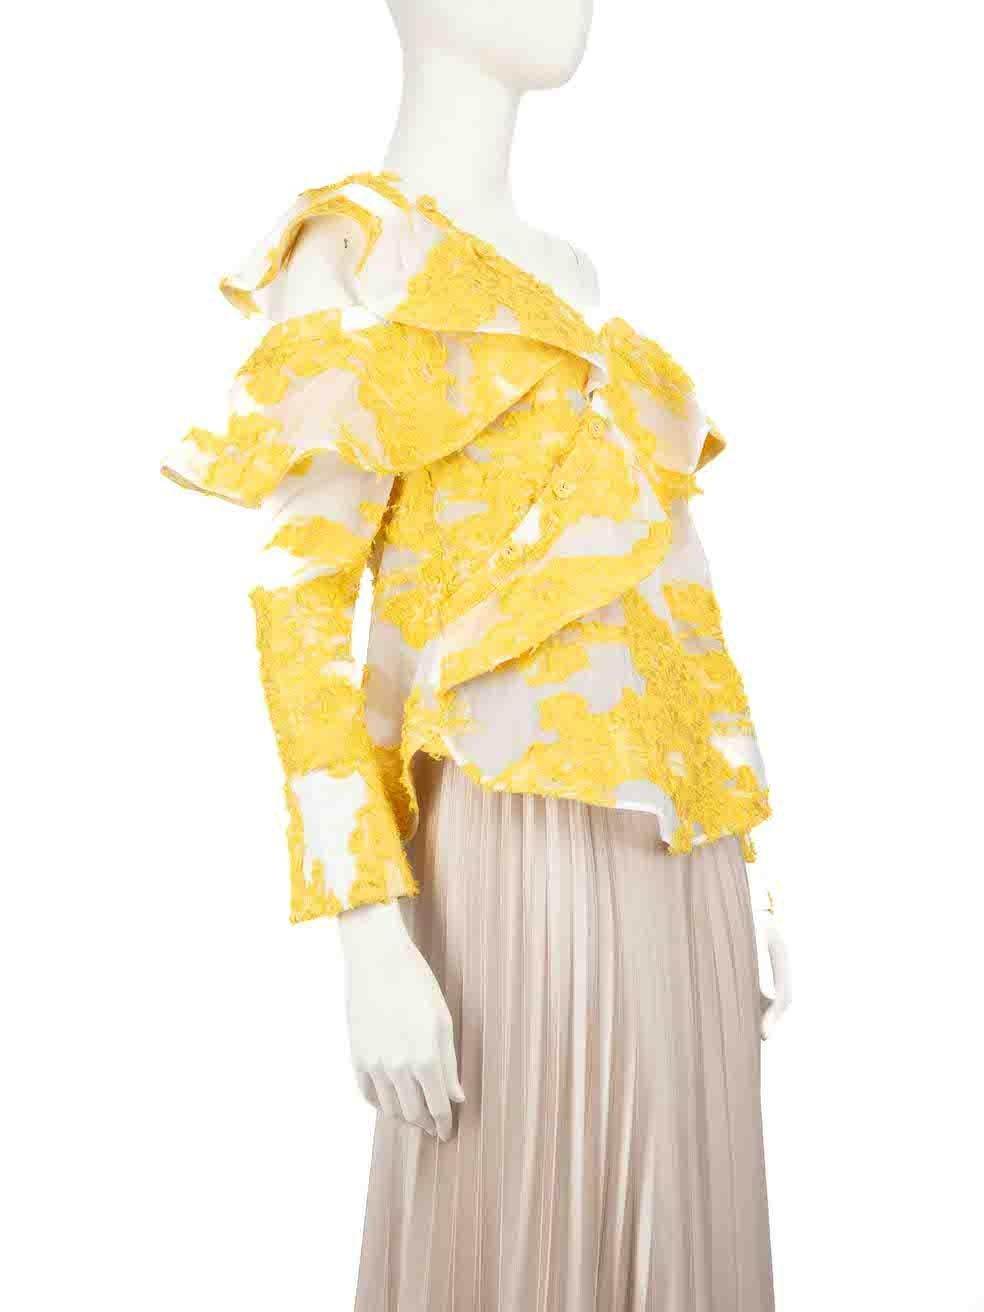 CONDITION is Very good. Hardly any visible wear to the top is evident on this used Self-Portrait designer resale item.
 
 
 
 Details
 
 
 Yellow
 
 Cotton
 
 Long sleeves top
 
 Sheer
 
 Embroidered accent
 
 Asymmetric neckline
 
 Front and side